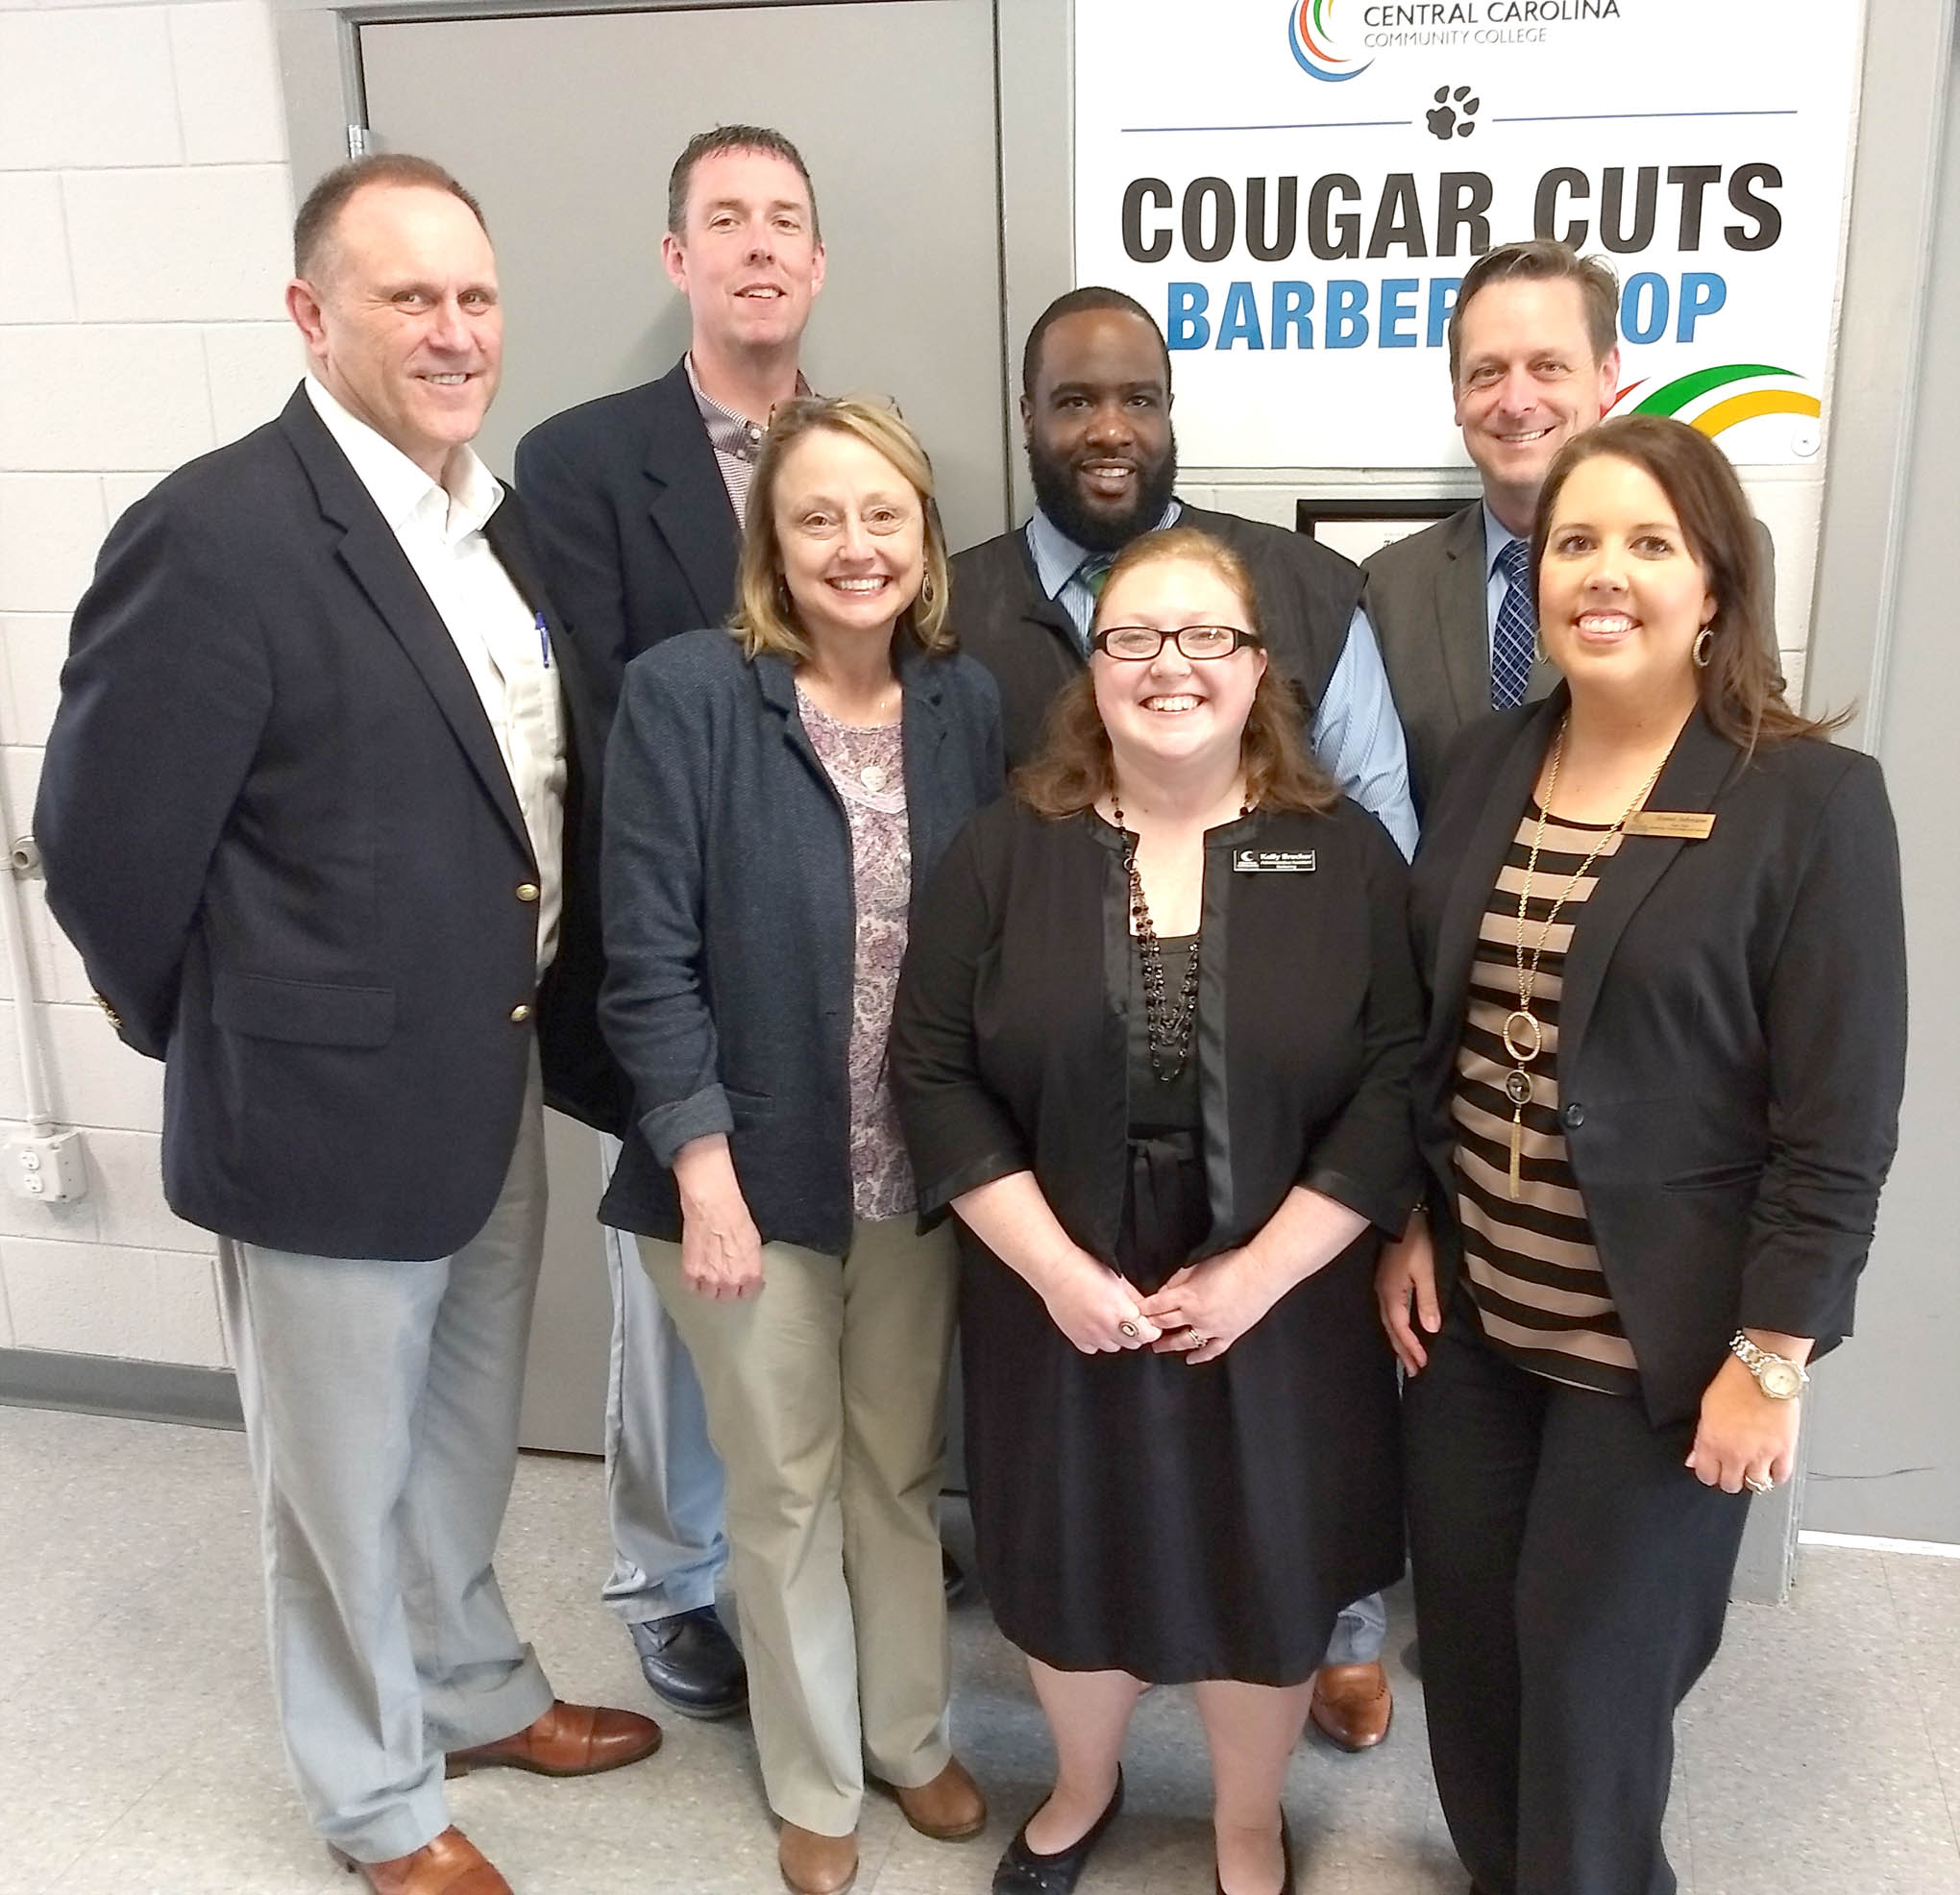 Click to enlarge,  The Central Carolina Community College Barbering program recently hosted officials from McDowell Technical Community College at the CCCC Dunn Center. Visiting were McDowell President Dr. John Gossett; Dr. Penny Cross, Vice President for Learning and Student Services; and Ryan Garrison, Vice President for Finance and Administration. Representing CCCC during the visit were Dr. Jon Matthews, Harnett Provost; Arthur McCullers, Barbering Instructor; Susan Johnson, Department Chair of Cosmetic Arts; and Kelly Brucker, Barbering Administrative Assistant. 